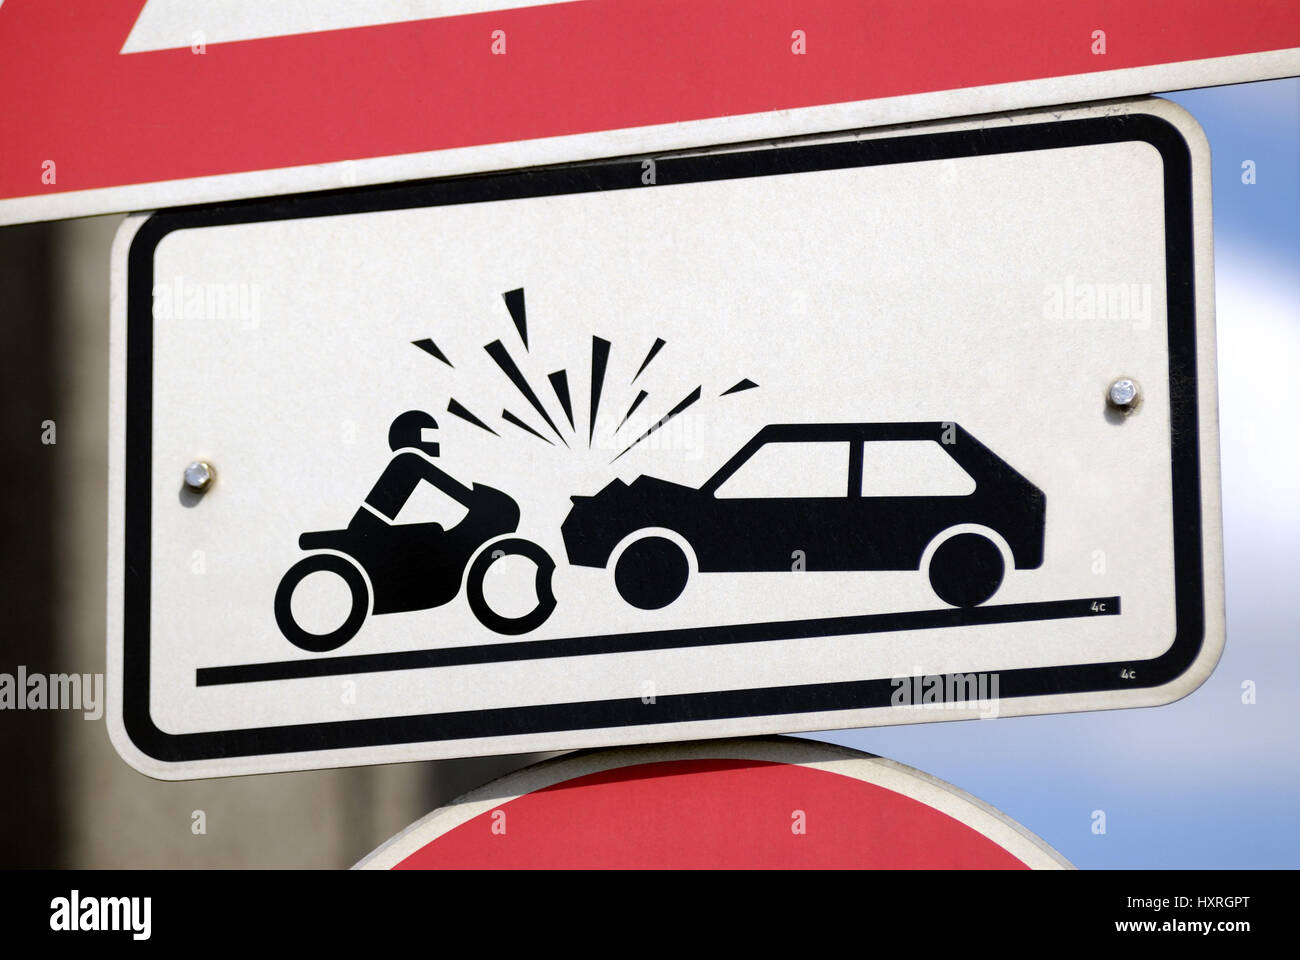 Road sign, road signs, sign, signs, accident, accidents, traffic accident, traffic accidents, car, cars, symbol, symbols, warning, warnings, danger, d Stock Photo